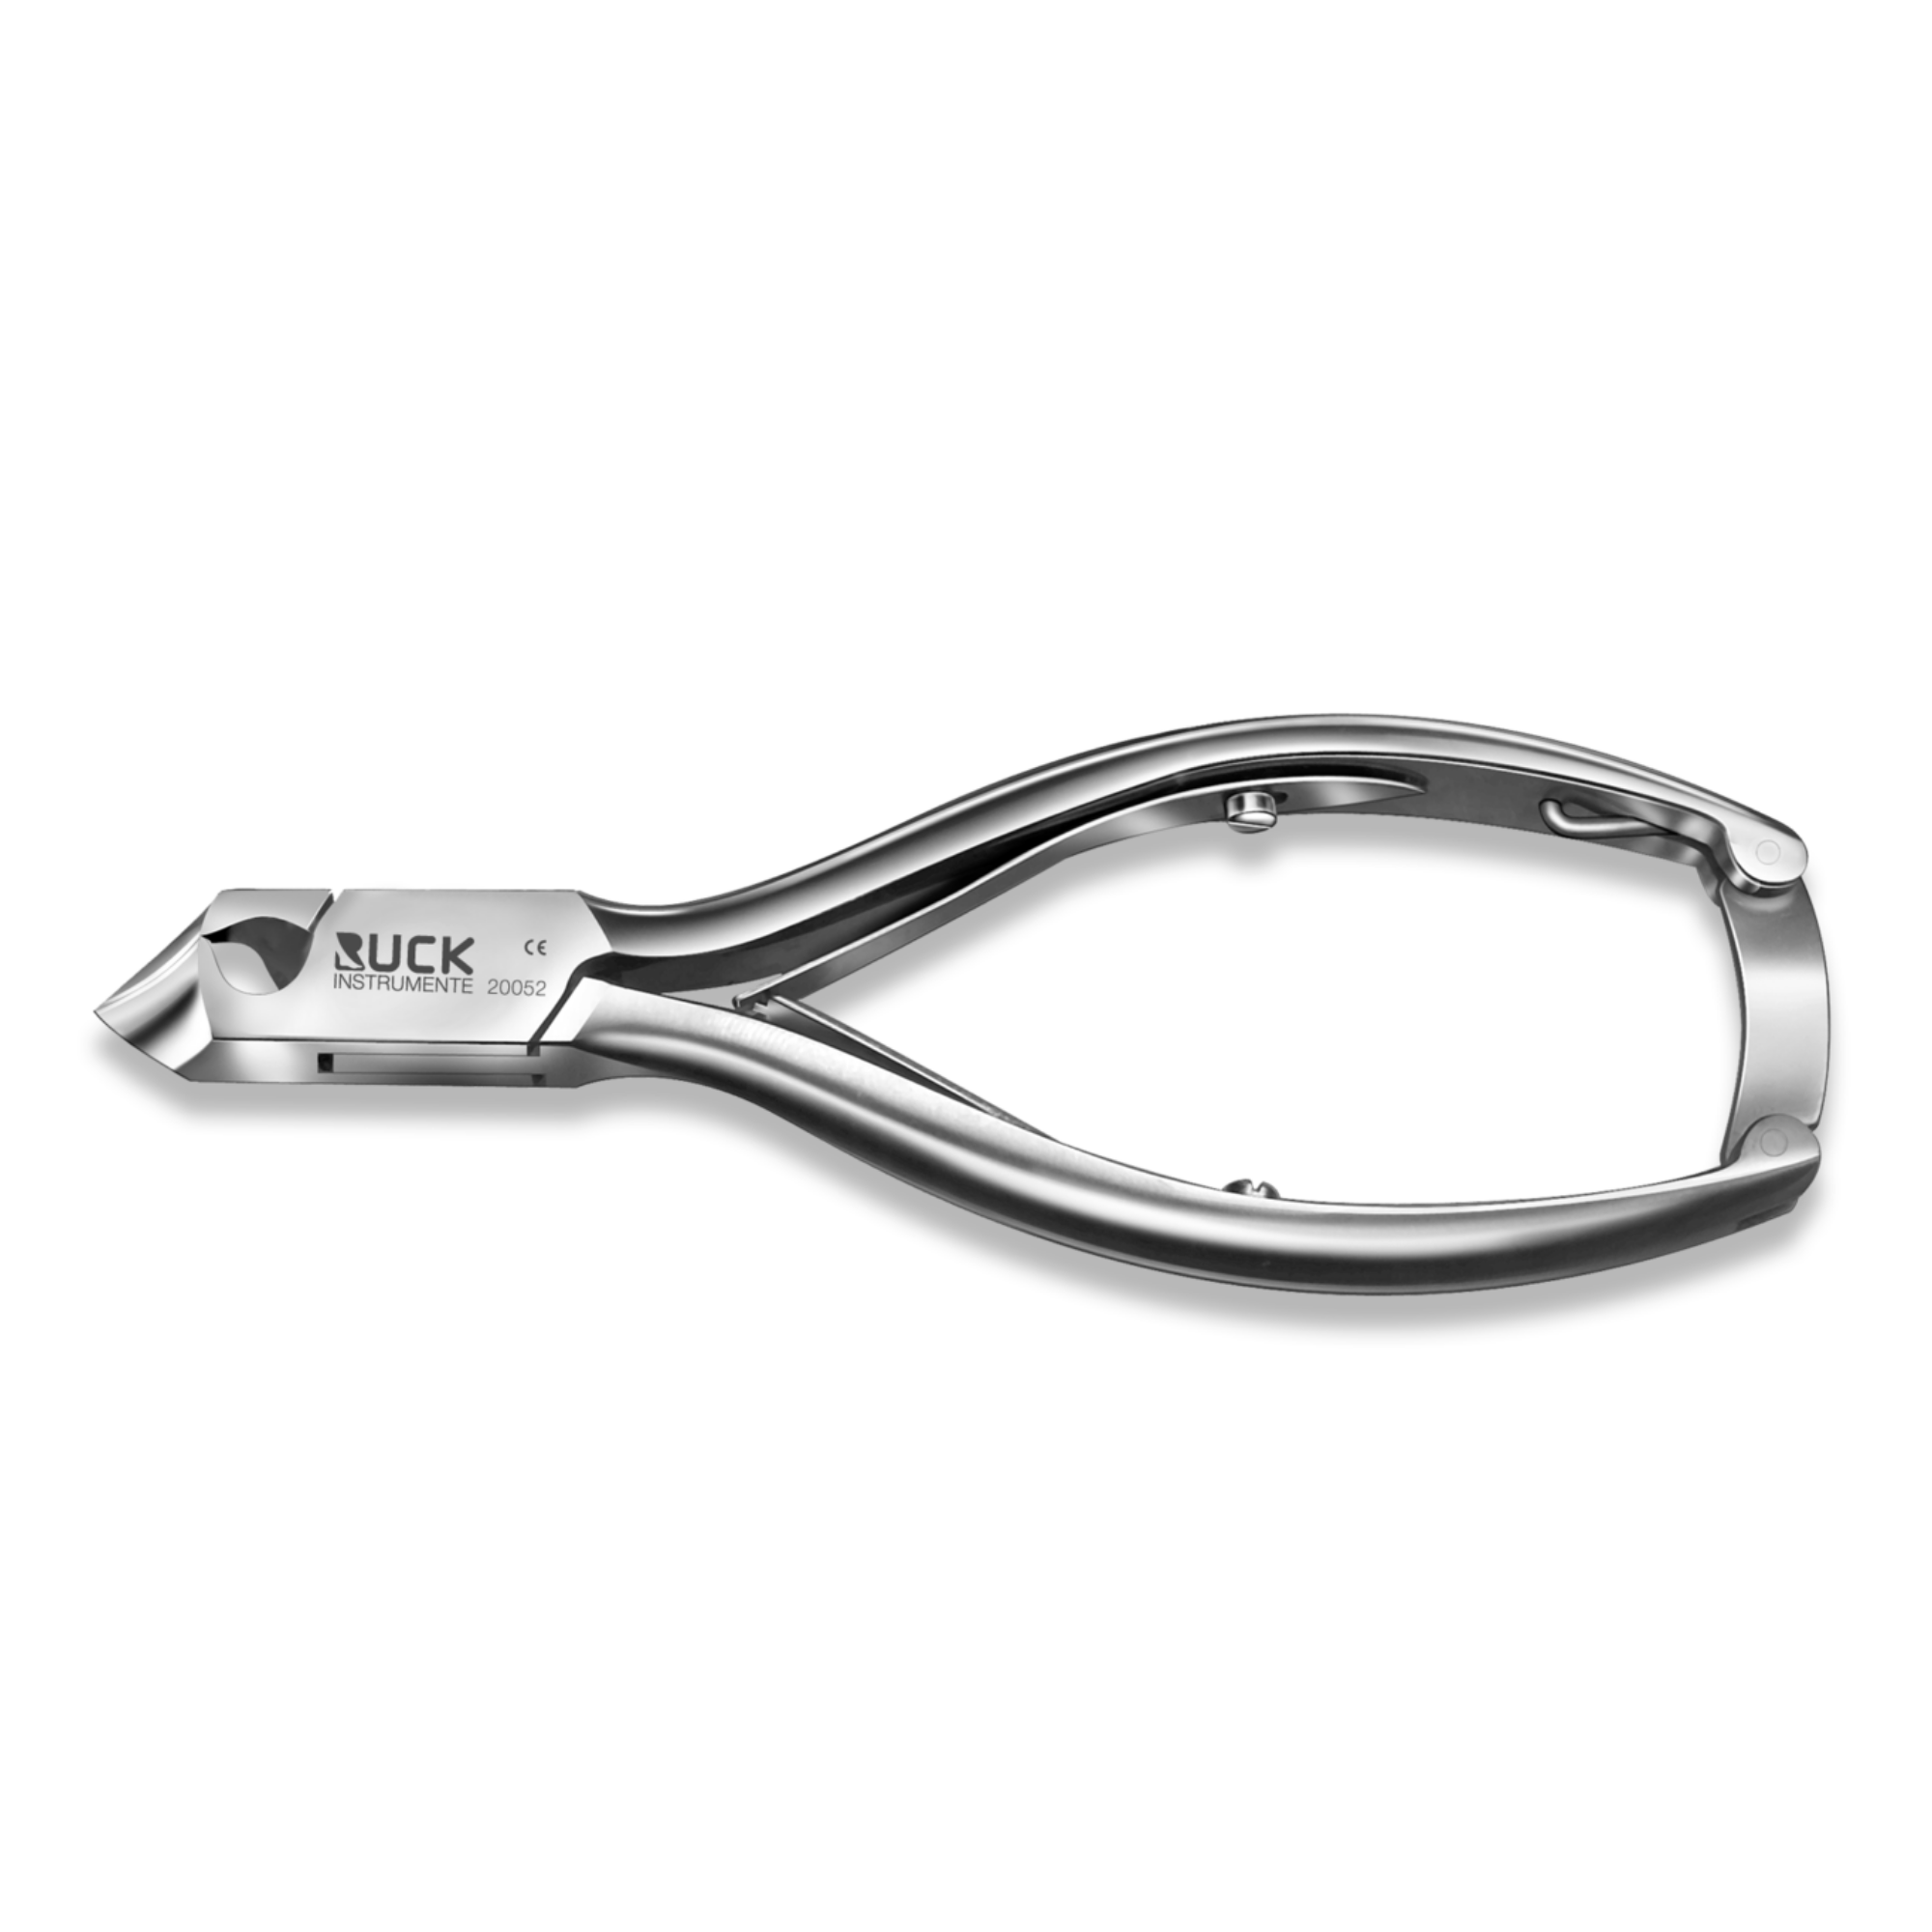 Pince à ongles - Coupe concave 15 mm - 14 cm - Ruck